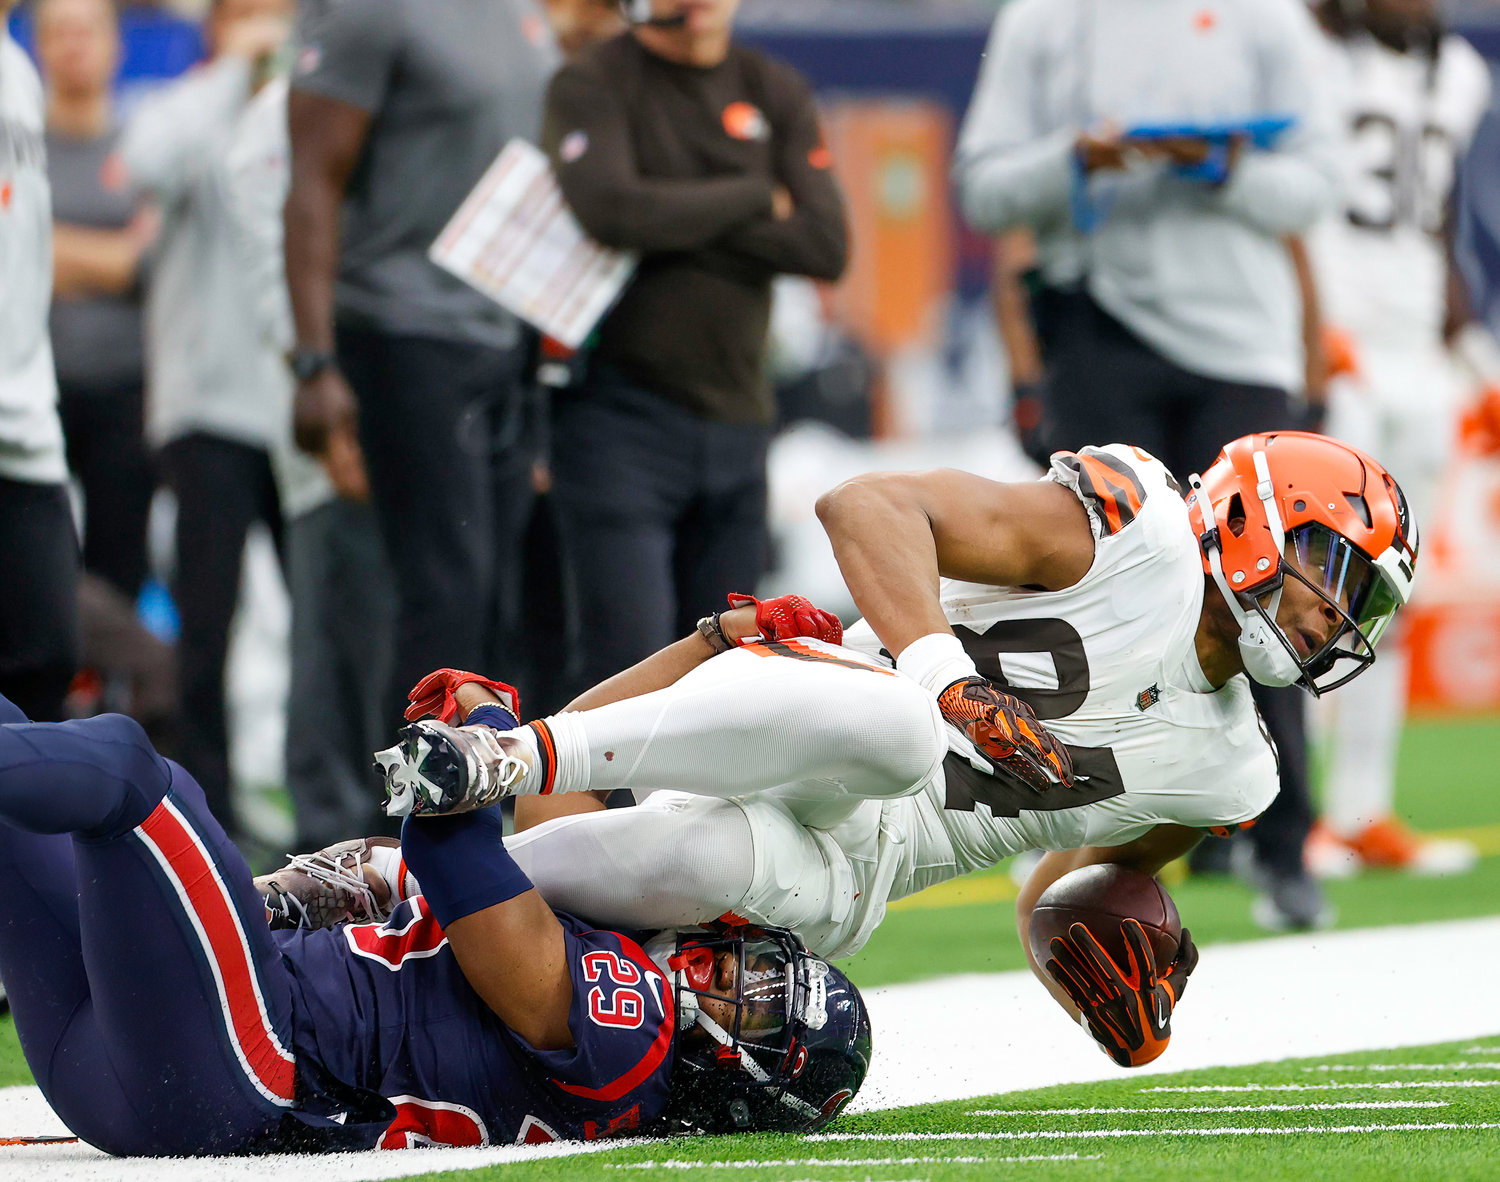 Cleveland Browns tight end Pharaoh Brown (84) is tackled by Houston Texans safety M.J. Stewart (29) during an NFL game between the Houston Texans and the Cleveland Browns on Dec. 4, 2022, in Houston. The Browns won, 27-14.